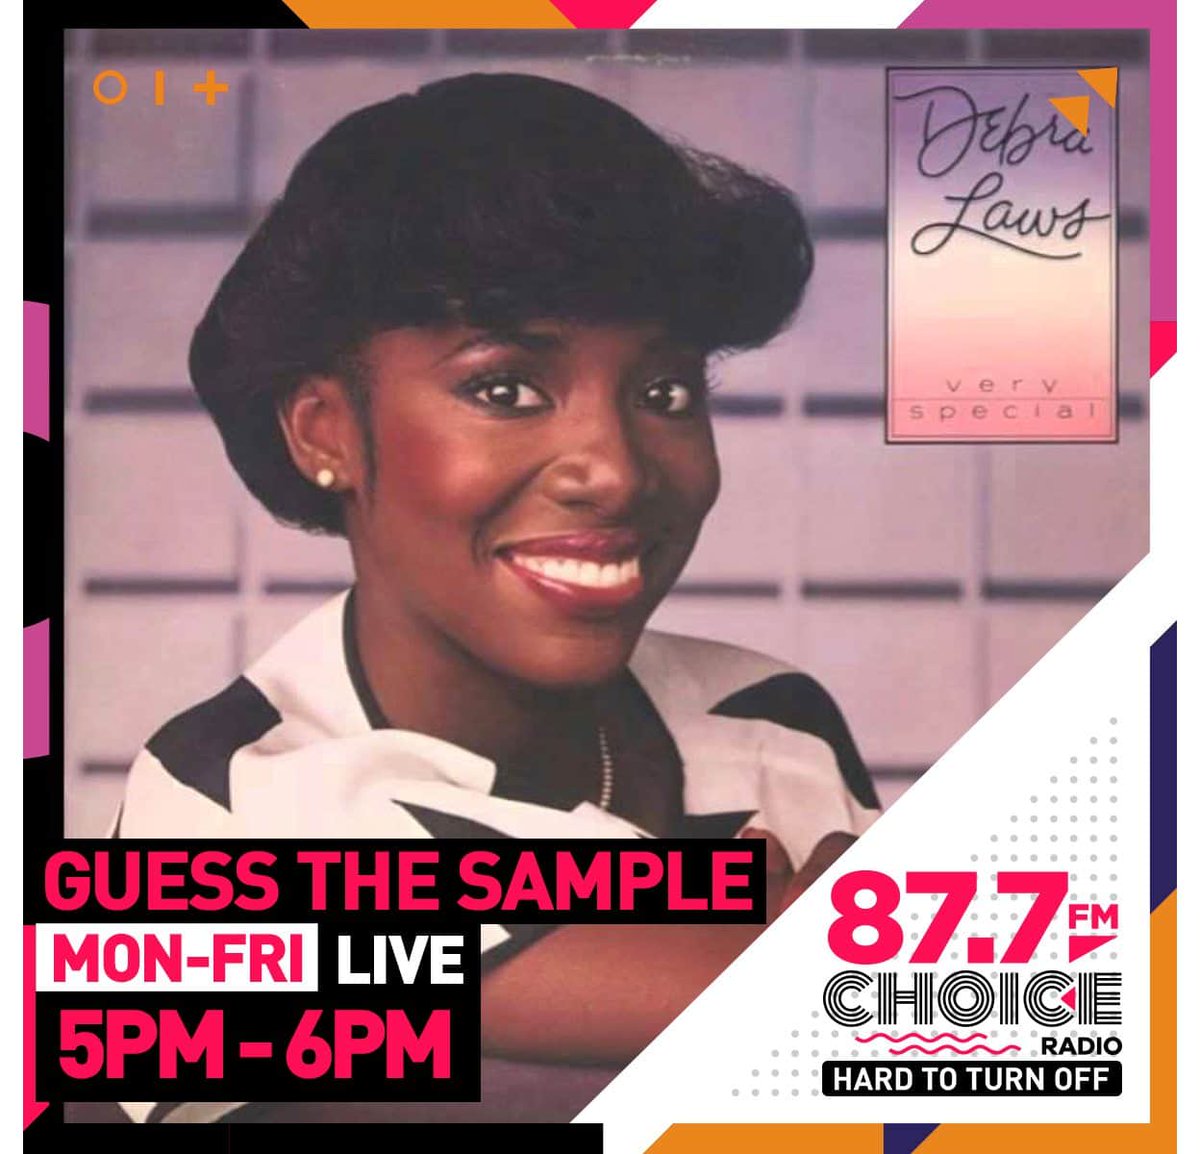 #TGIF #GuessTheSample track is 'Very Special' by #DebraLewis 🔥🔥 Can you figure out the singer and the song that sampled this track? @ChoiceRadioKE @SadzIbrahim #KaceAndSadiaShow #HardToTurnOff